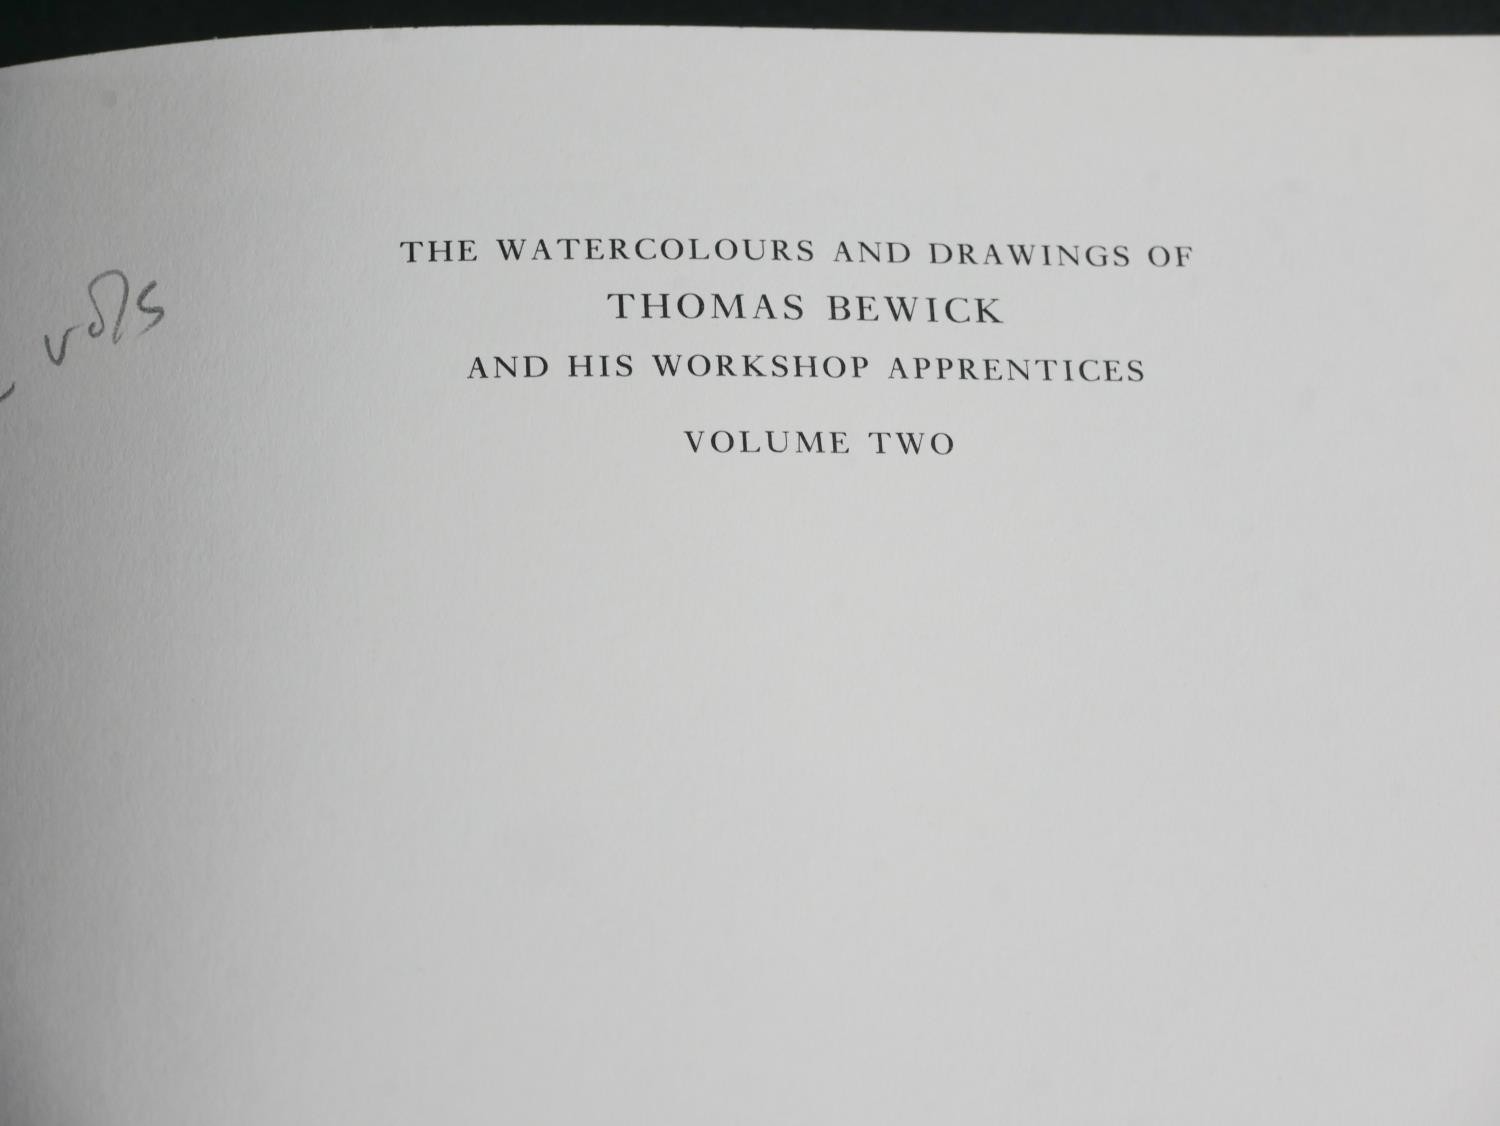 Iain Bain; The Watercolours and Drawings of Thomas Bewick And His Workshop Apprentices, volumes I - Image 4 of 9